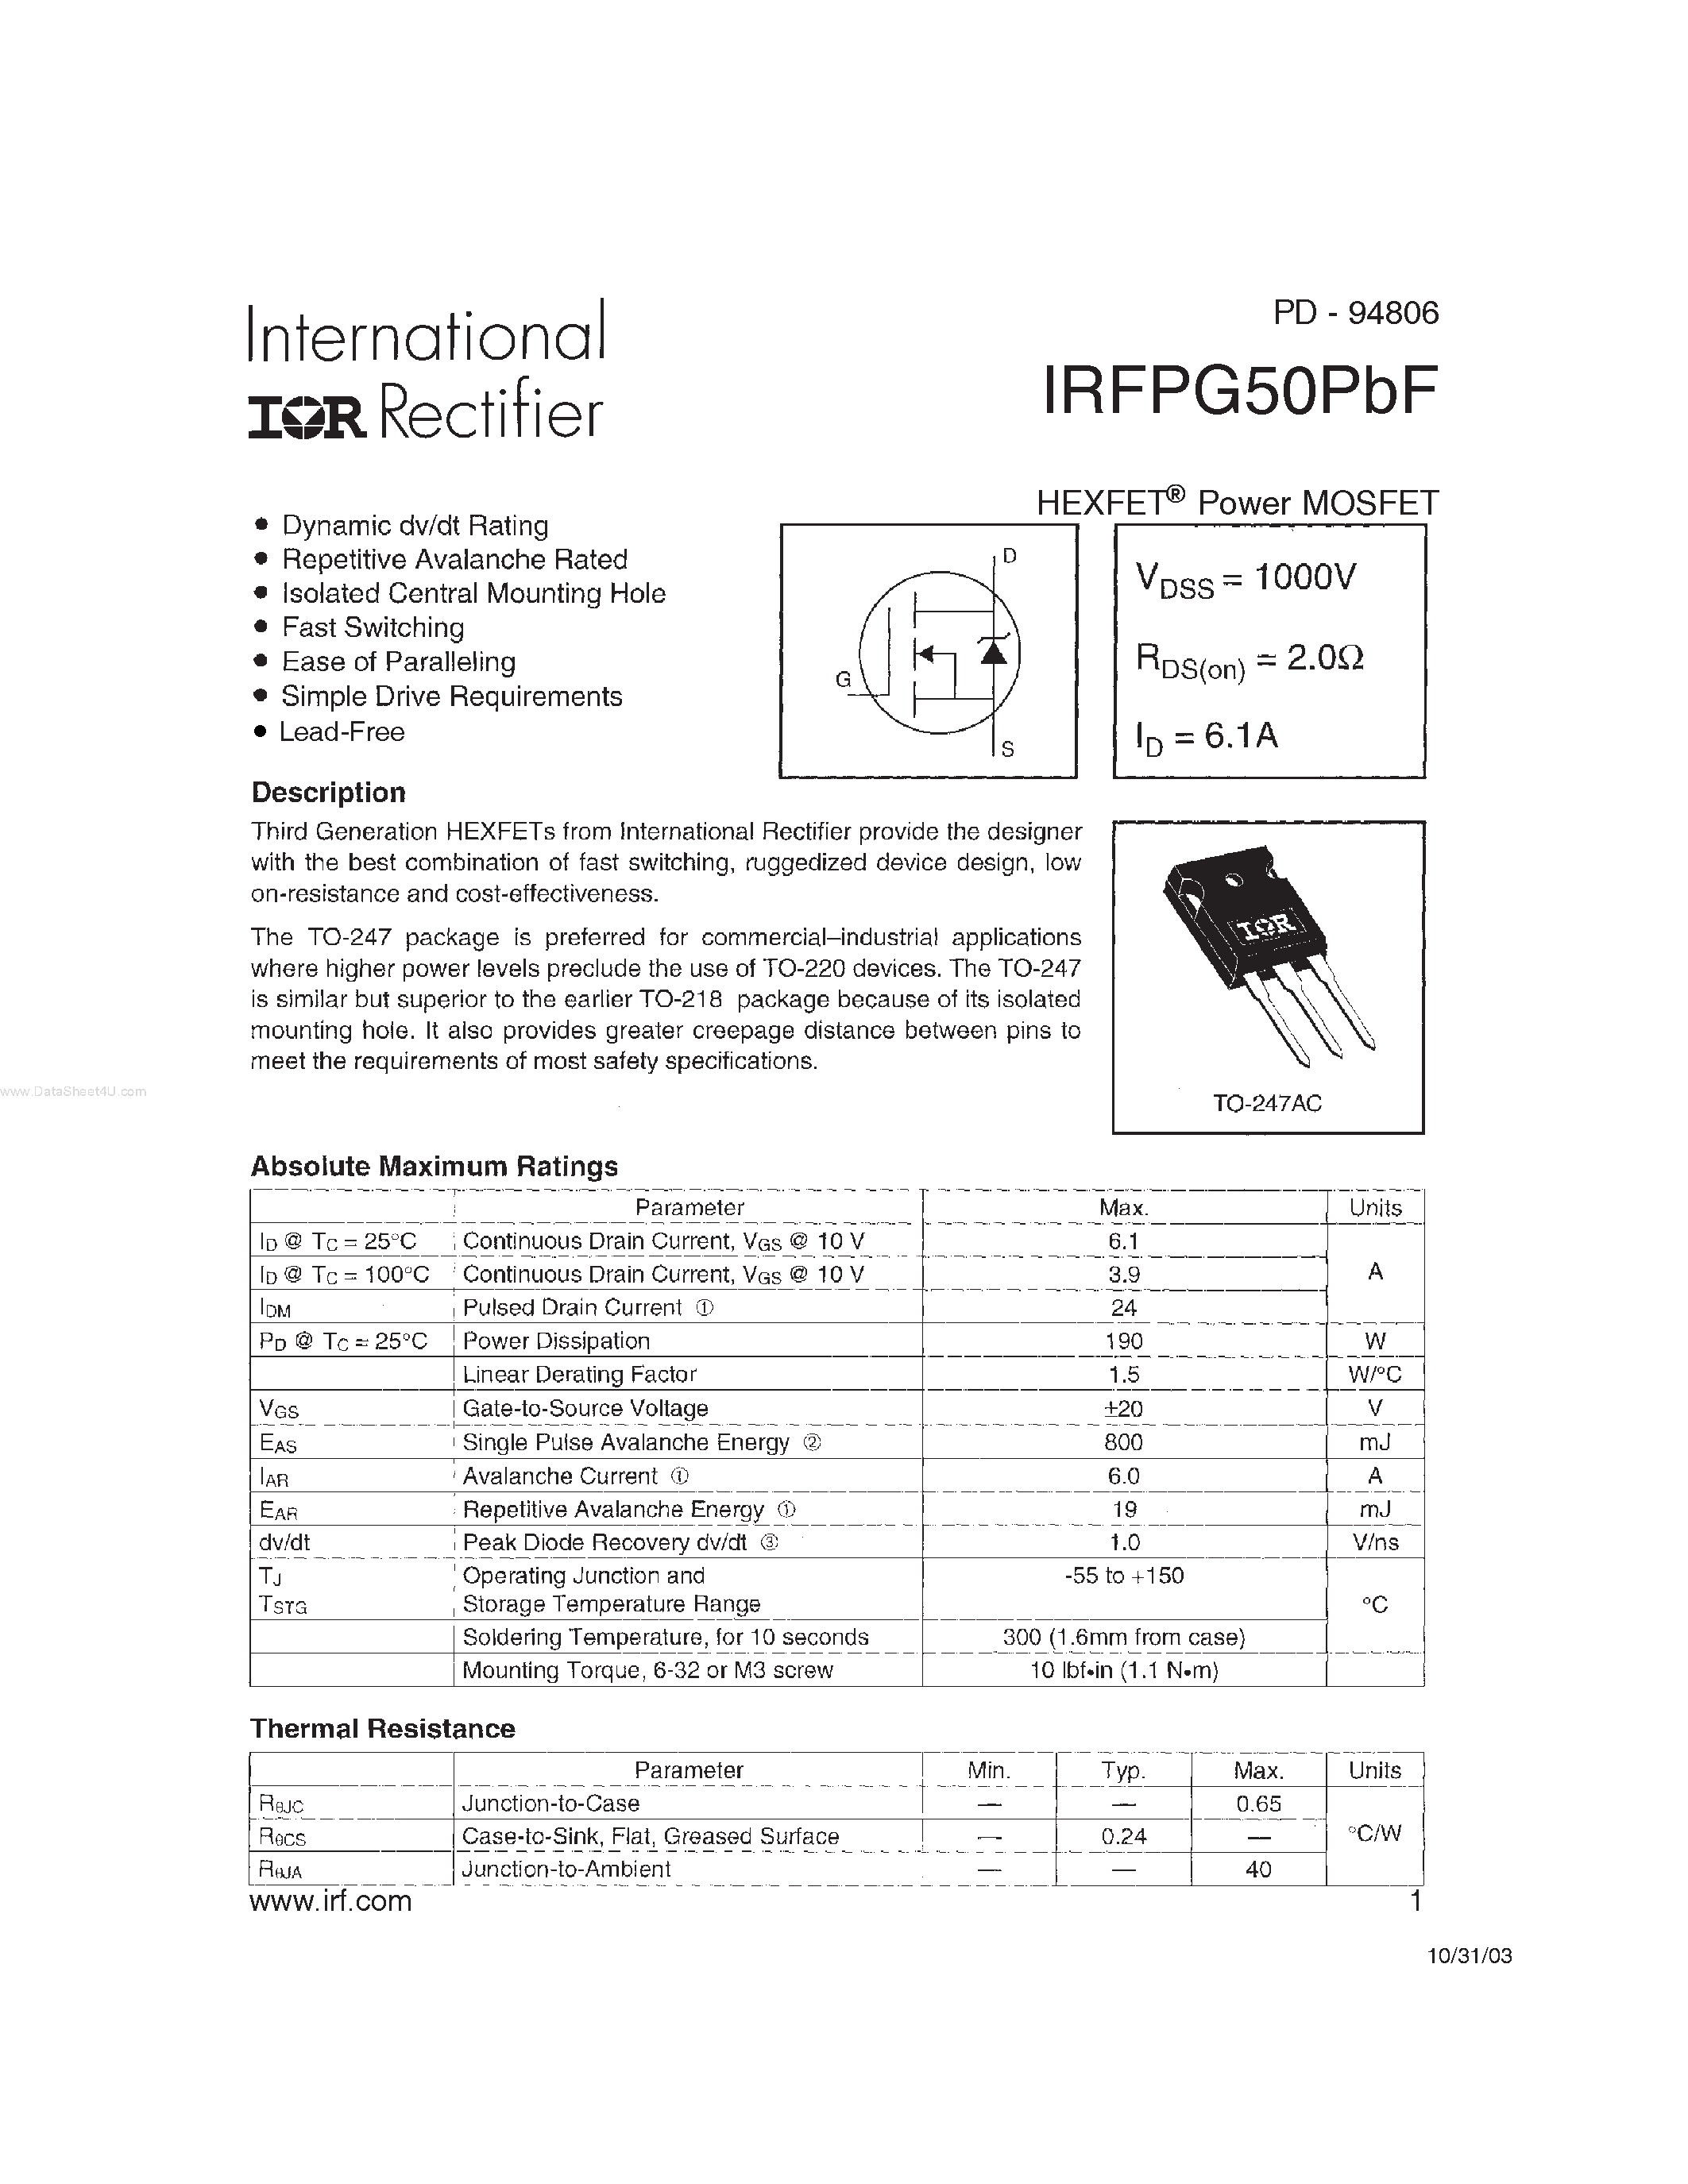 Datasheet IRFPG50PBF - HEXFET Power MOSFET page 1